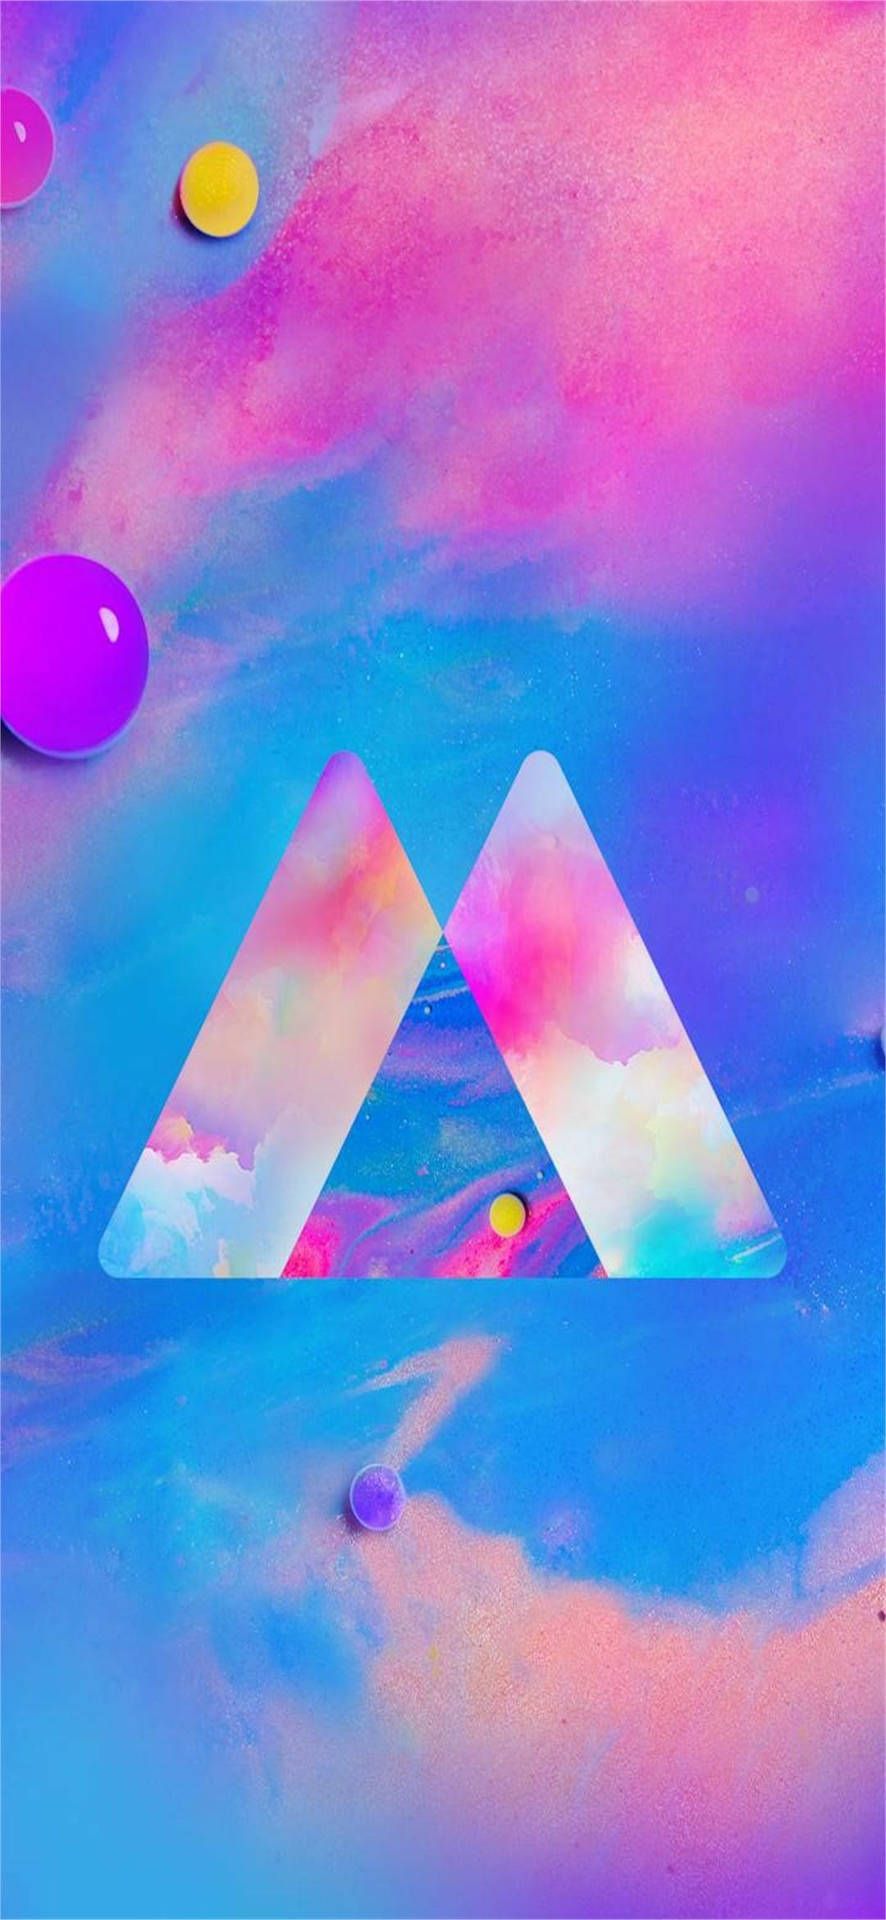  Samsung Galaxy A51 Hintergrundbild 886x1920. Download Samsung A51 Triangles And Balloons Blue And Pink Aesthetic Wallpaper